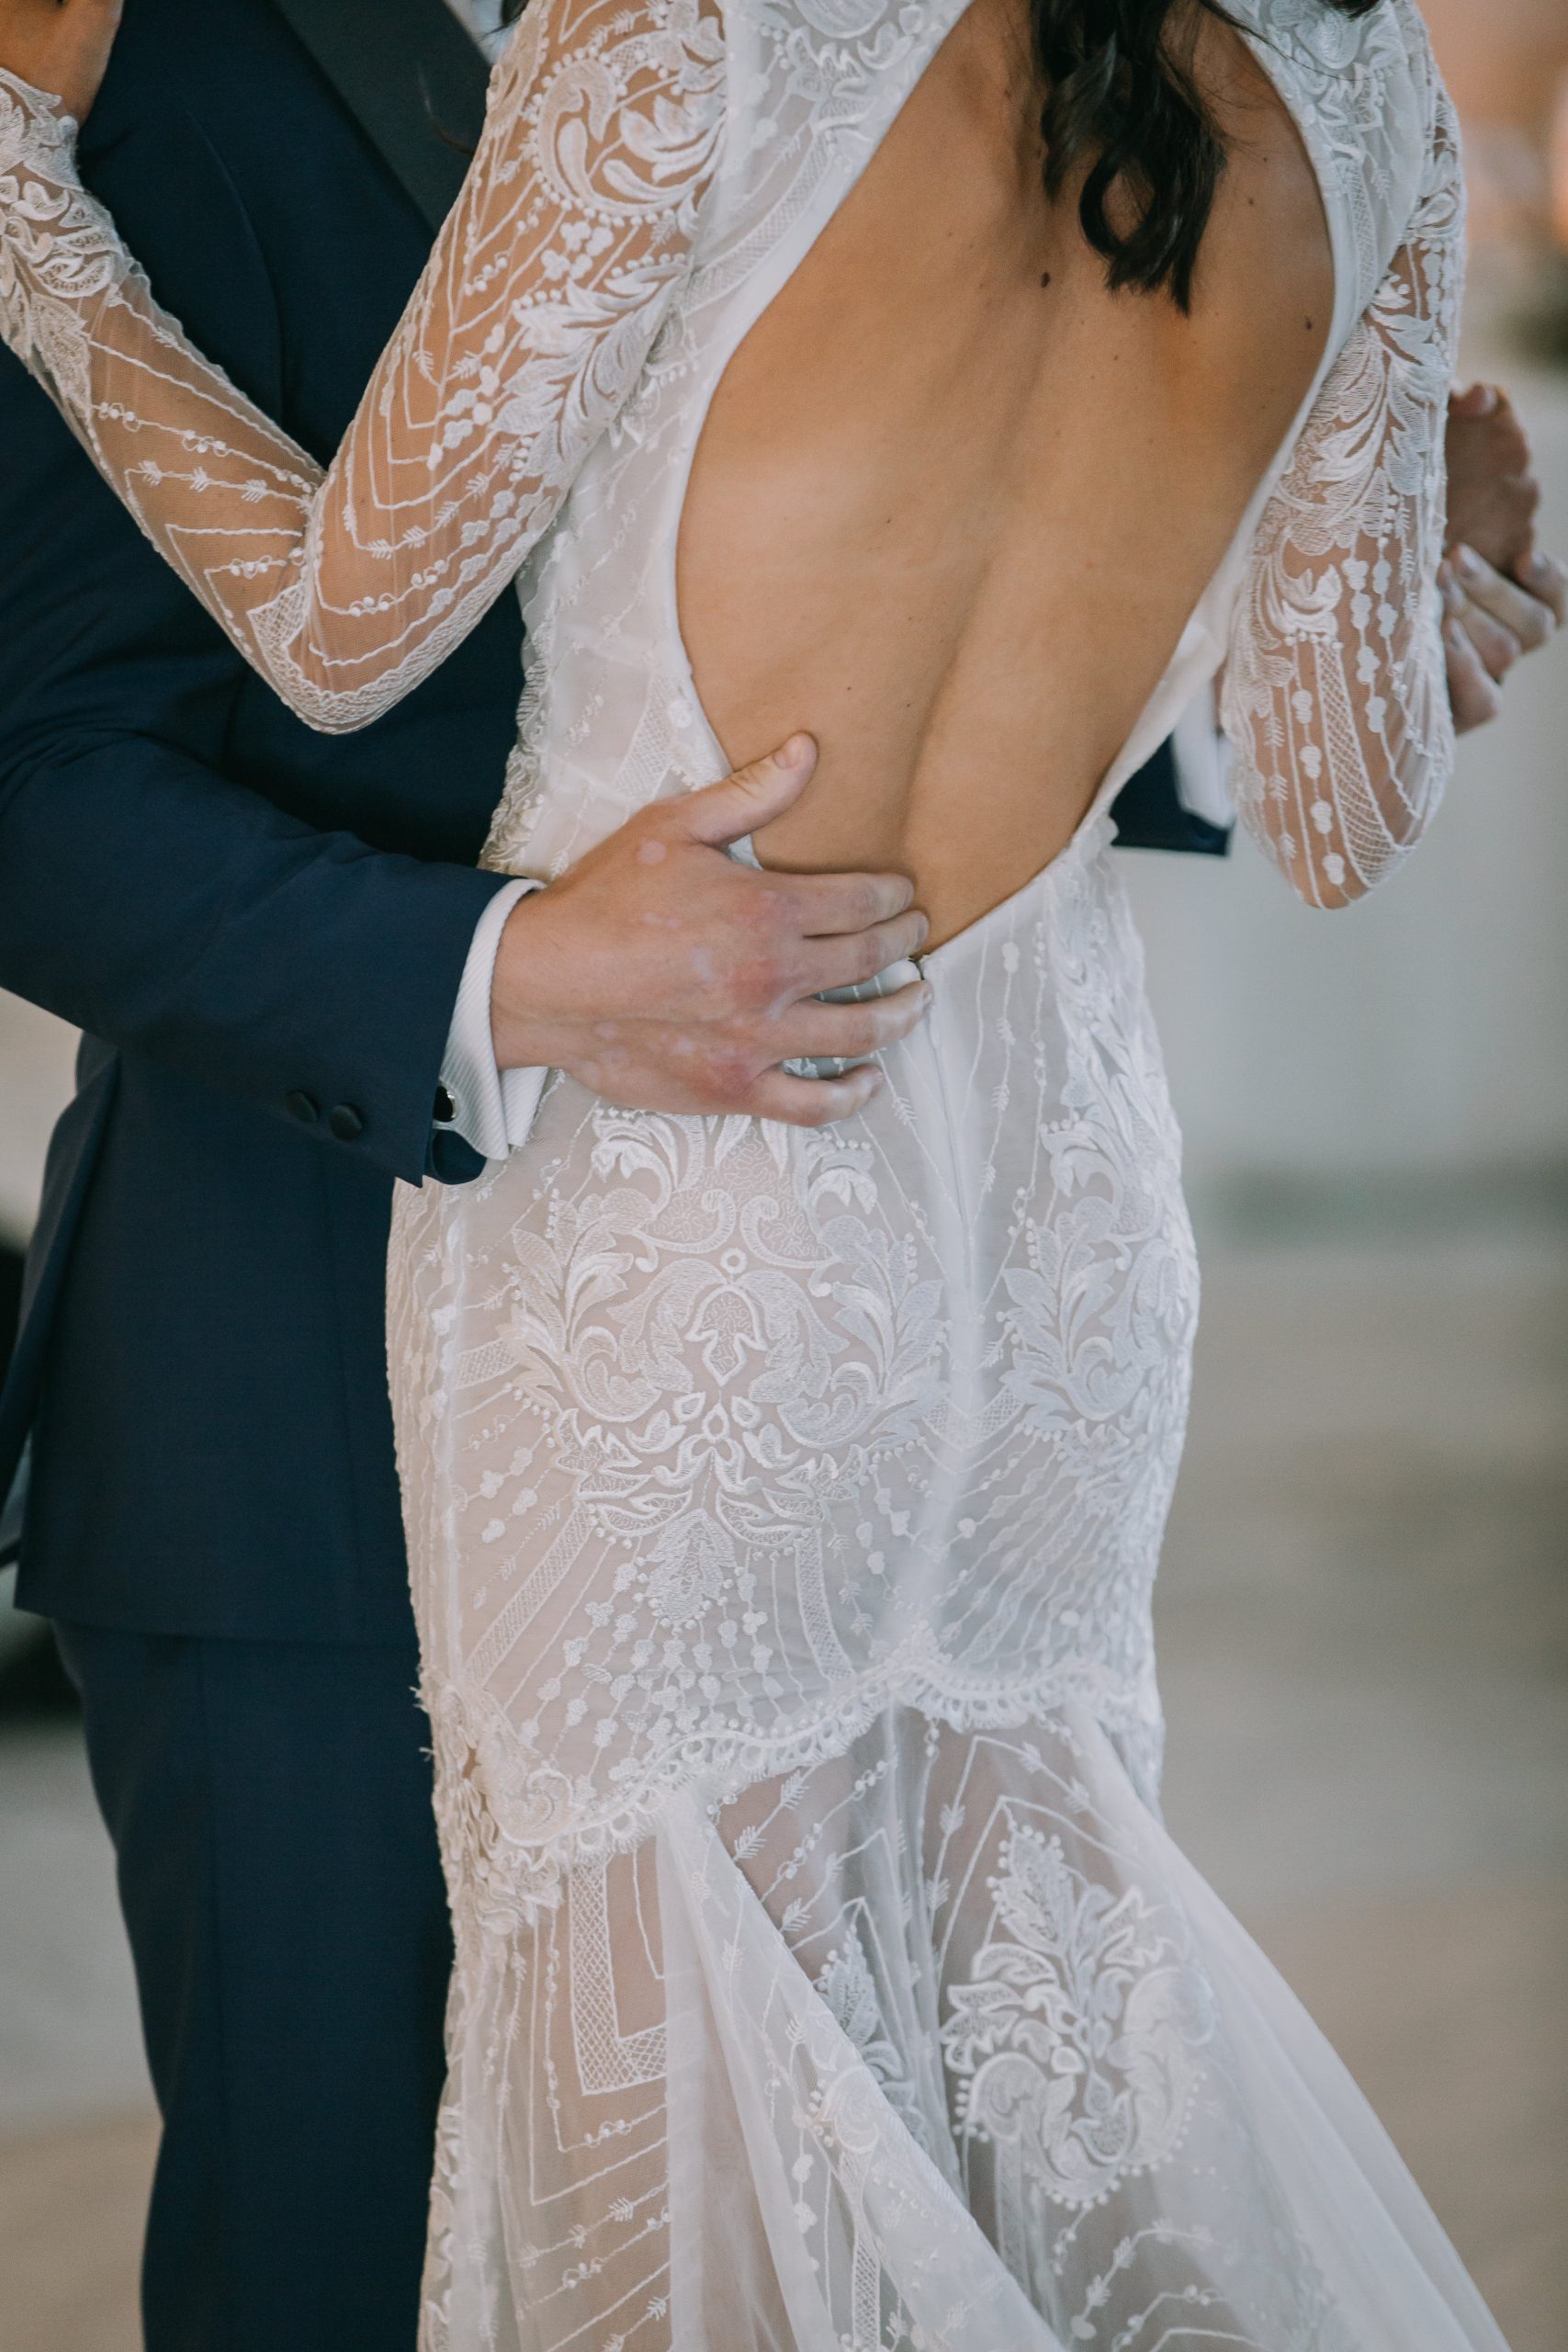 A man and woman embracing in their wedding dress.